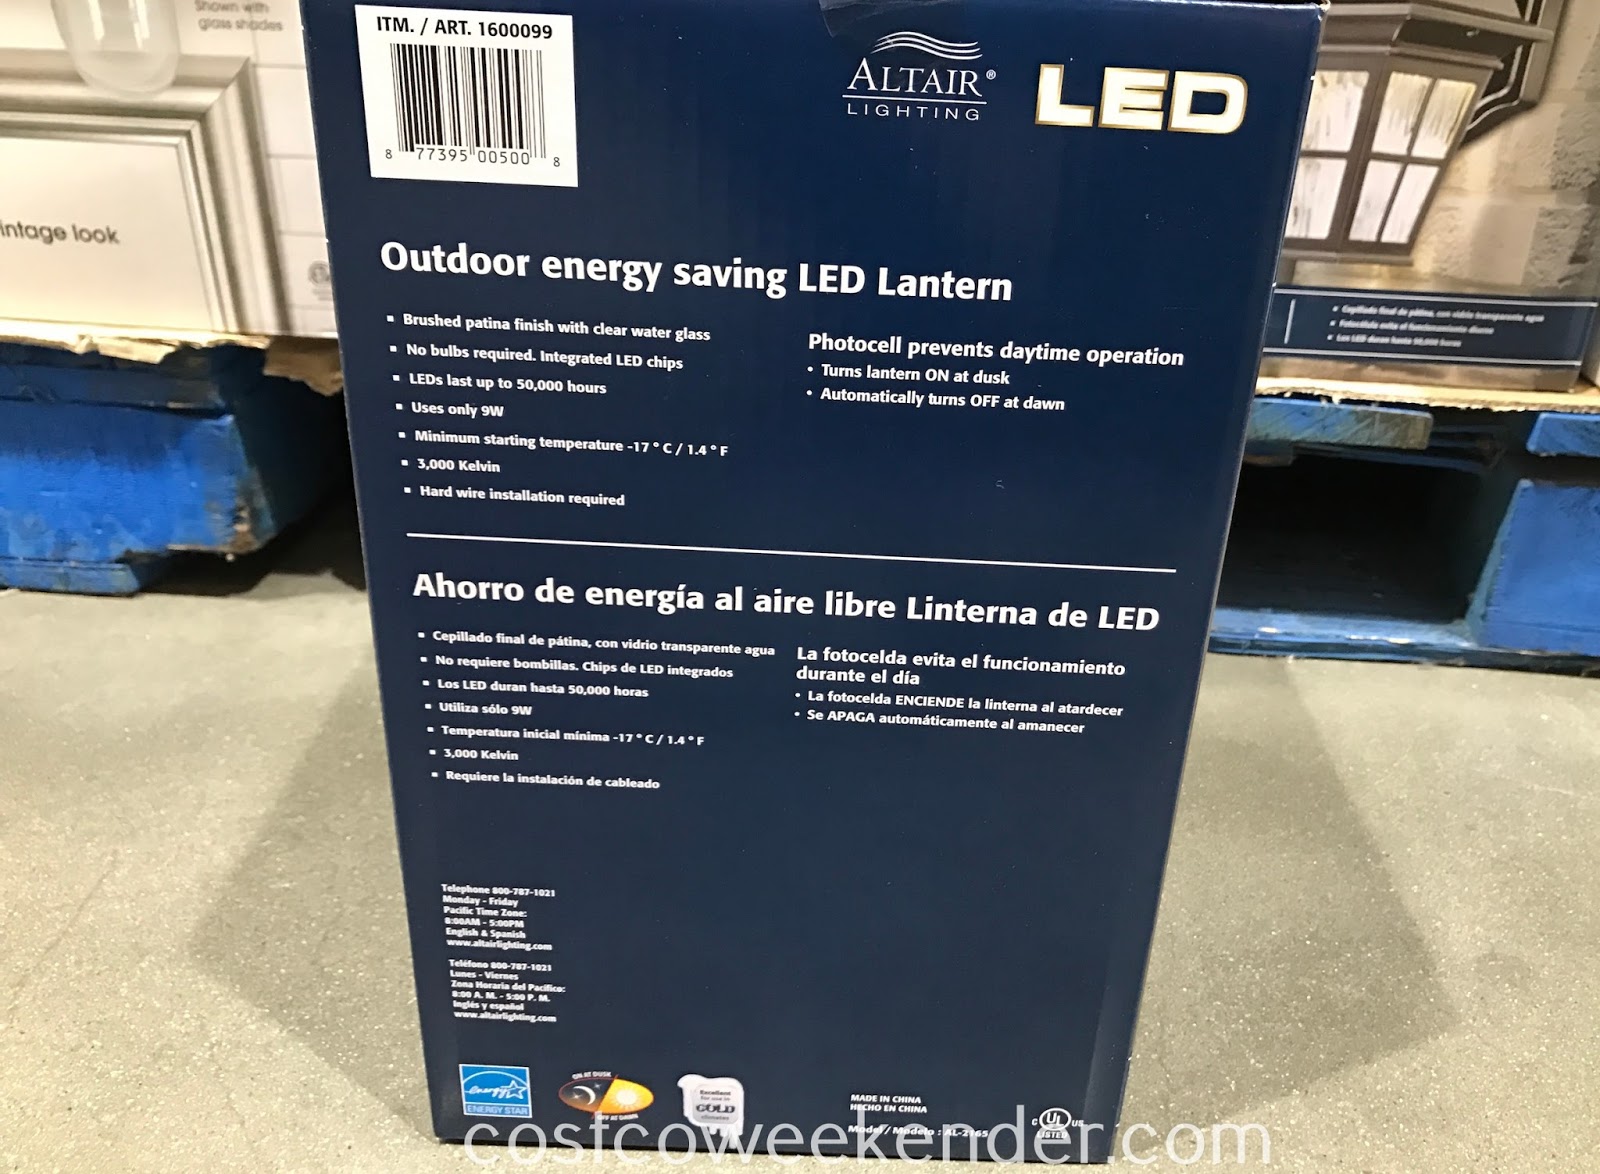 Altair Outdoor LED Coach Light | Costco Weekender